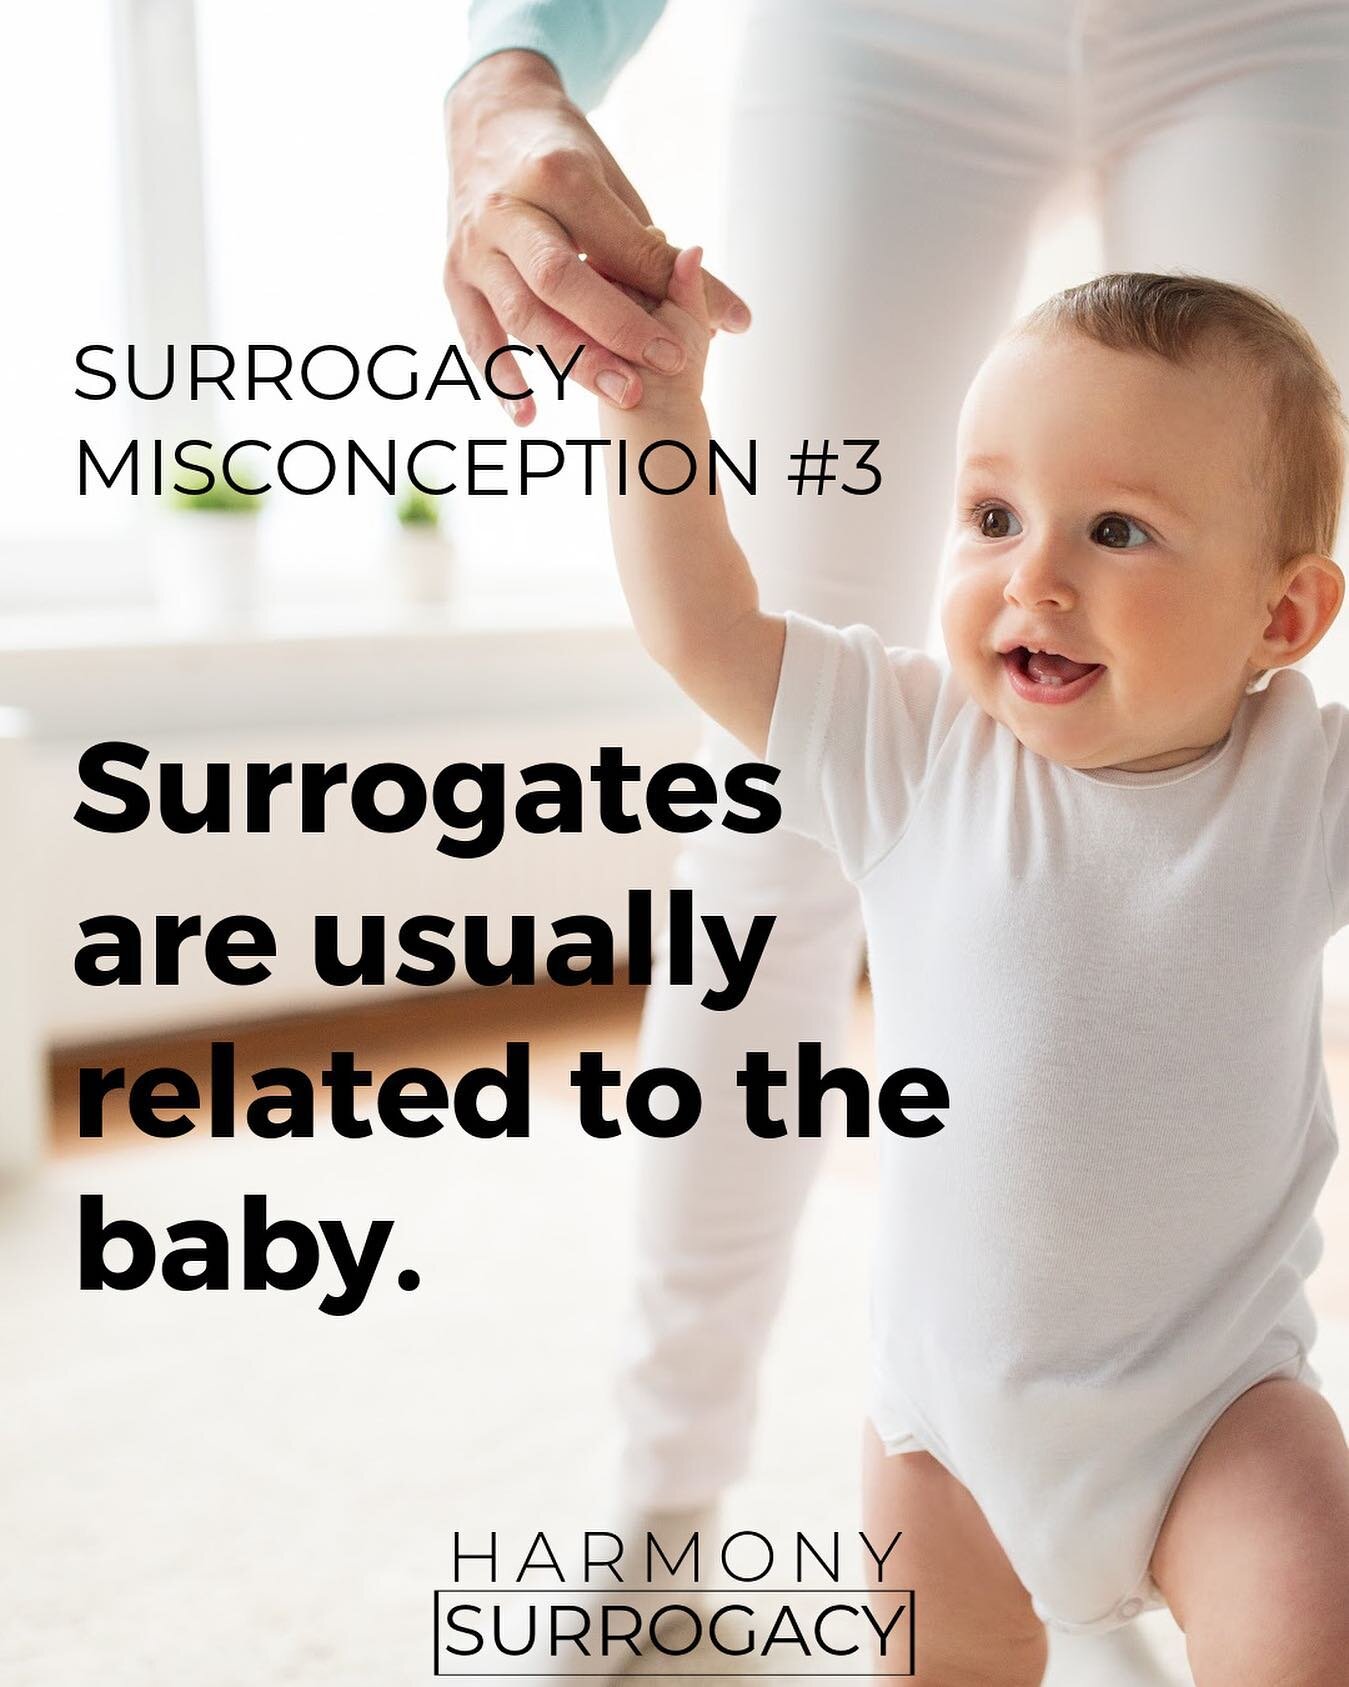 Most surrogates are not genetically related to the child they carry. In gestational surrogacy, the egg comes from either the intended mother or a donor, not the surrogate. Click the link in our bio to learn more and to see if you qualify.